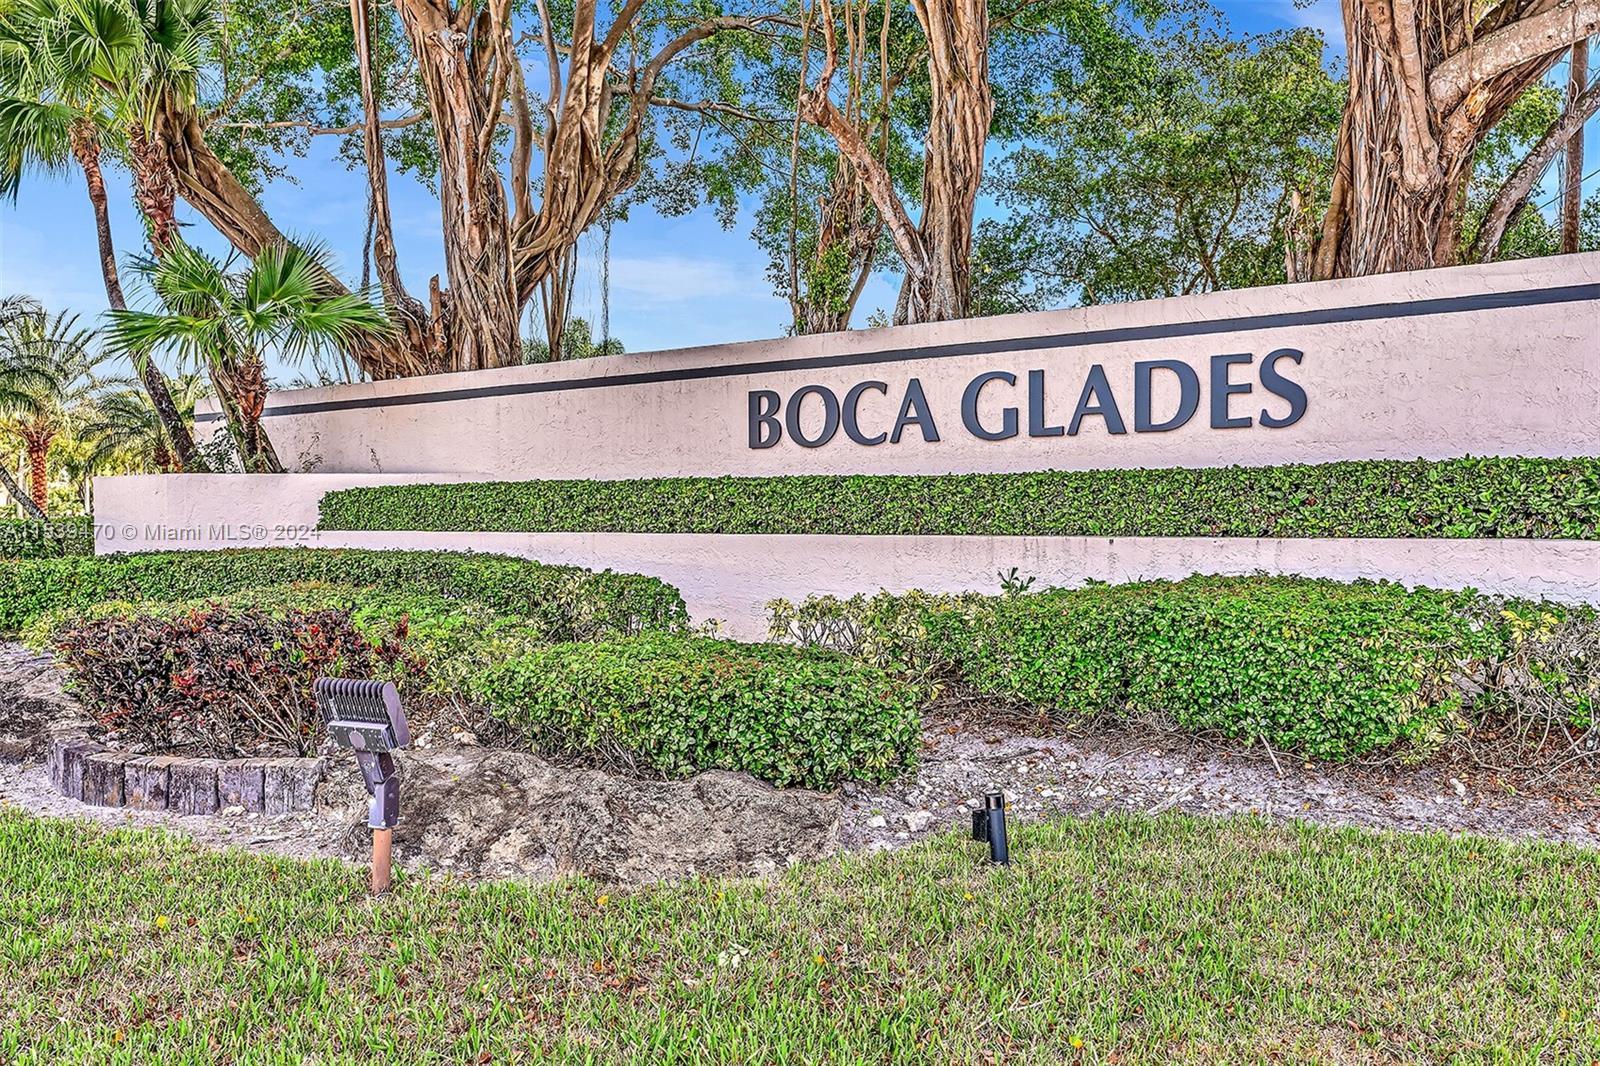 GREAT UNIT IN SOUGHT AFTER BOCA GLADES! 2 BED 2 BATH LAKE VIEW CONDO CONVENIENTLY LOCATED NEAR THE T